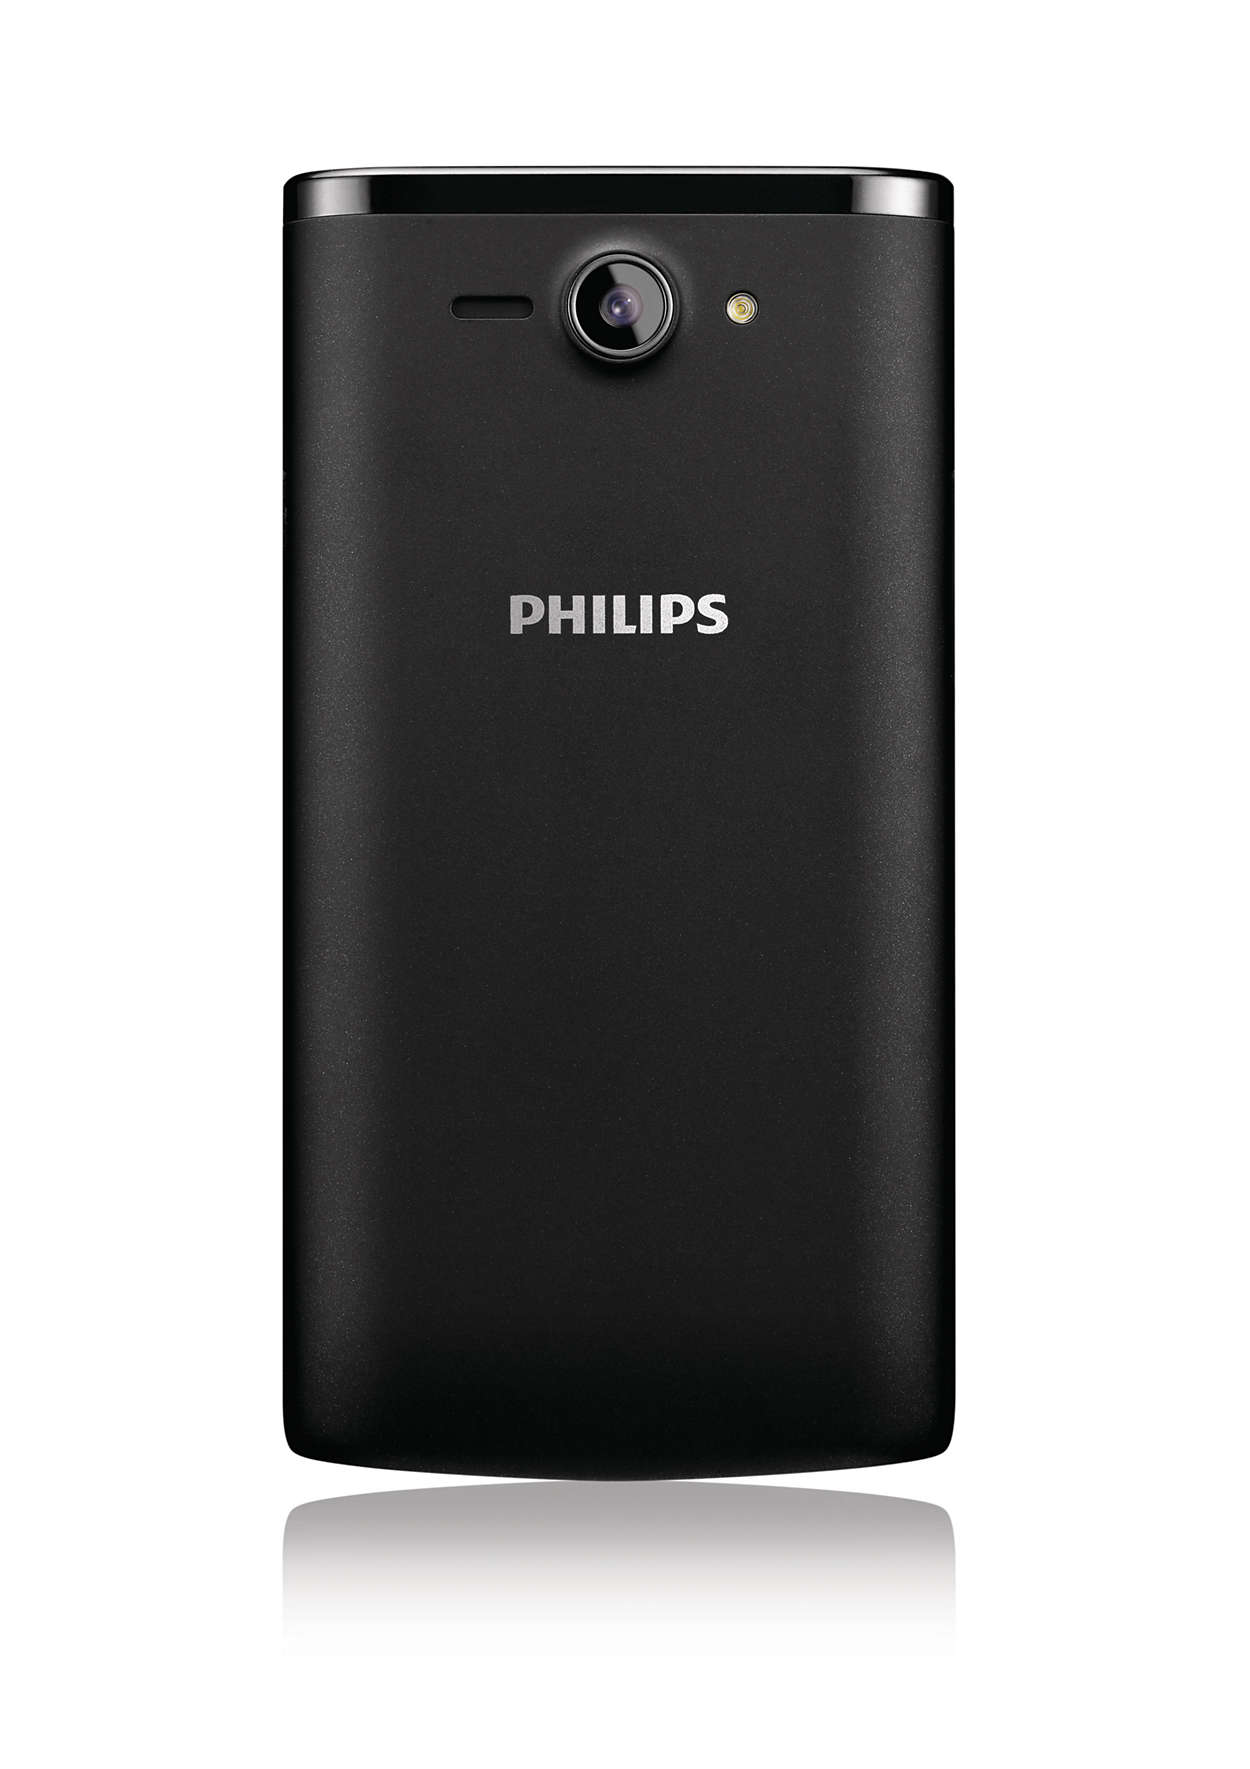 Nathaniel Ward Dexterity Join Smartphone CTS388BK/58 | Philips